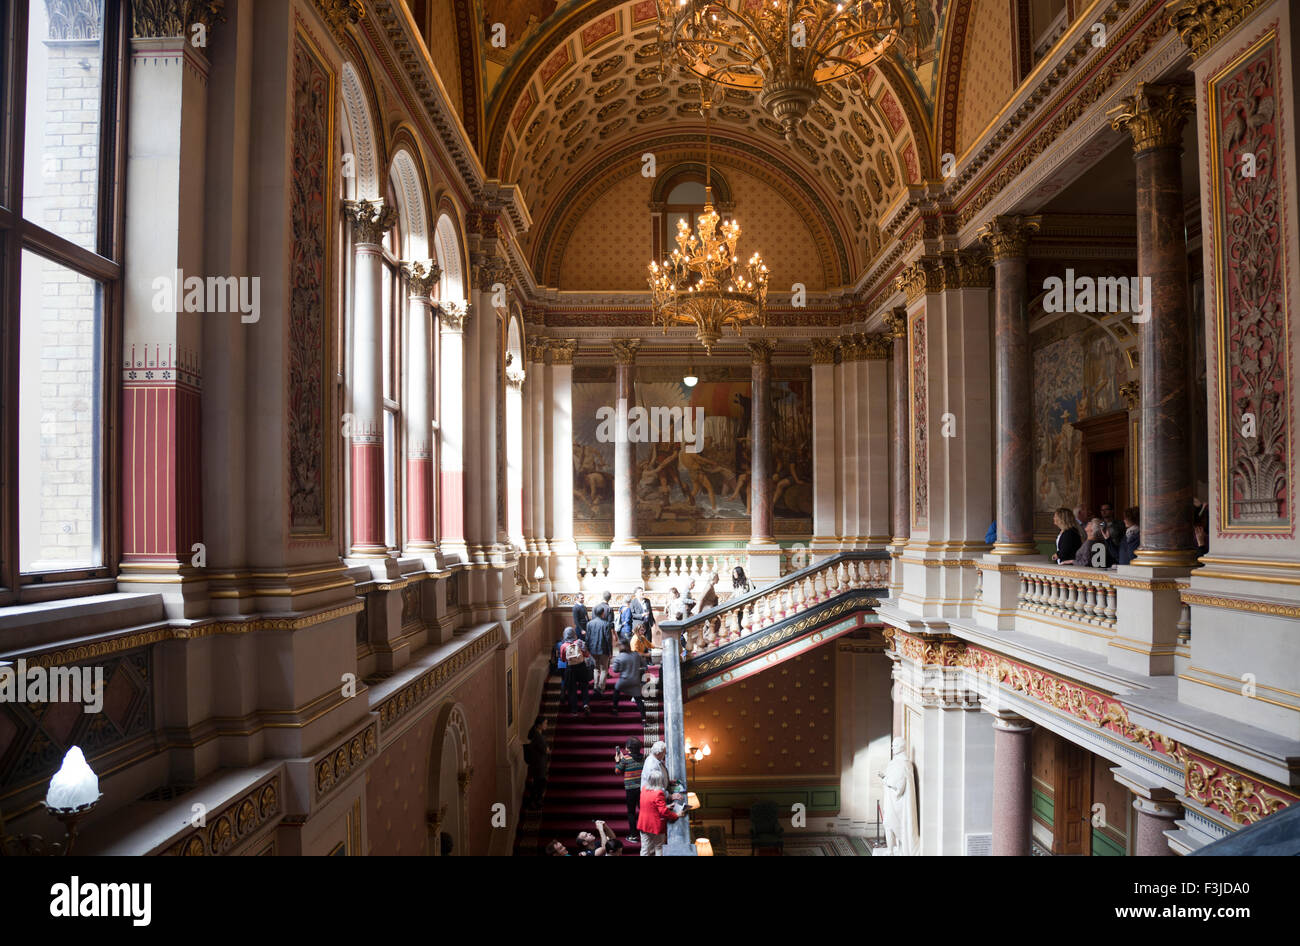 Open House Day at Foreign & Commonwealth Office - The Grand Staircase ...